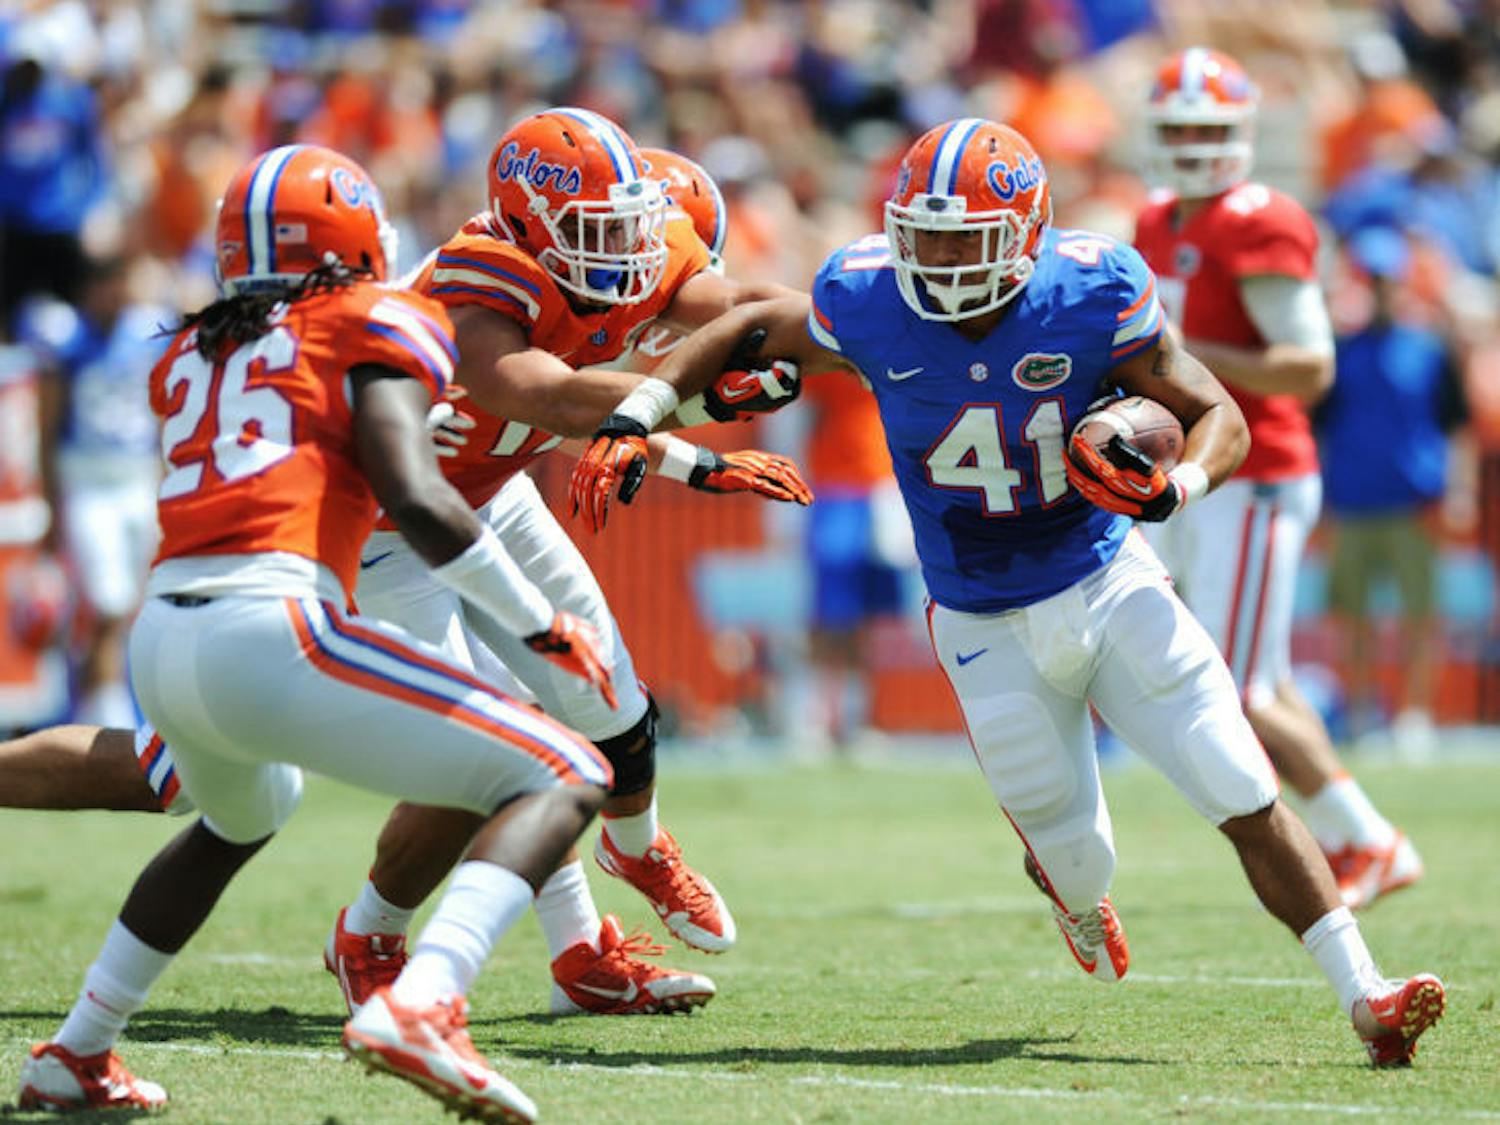 Hunter Joyer (41) runs the ball during Florida’s Orange and Blue Debut on Saturday in Ben Hill Griffin Stadium. The Gators’ two offenses combined for 606 yards in the game.